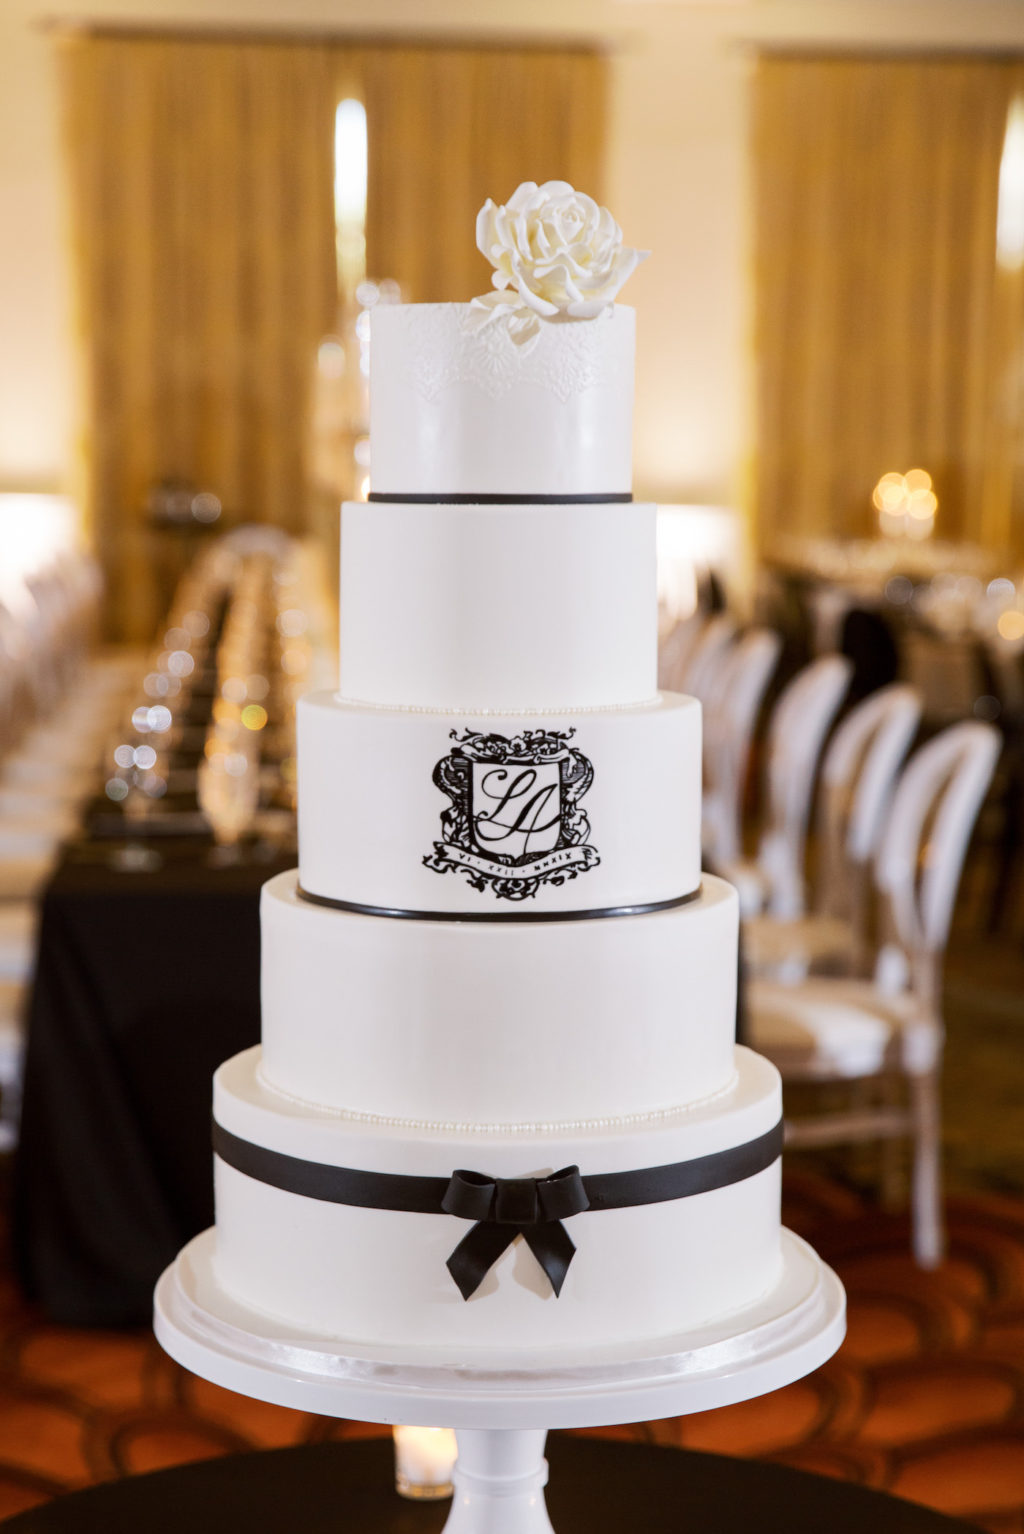 Classic Timeless Elegant White Five Tier Wedding Cake with Black Ribbon and Custom Monogram, White Rose Cake Topper | Tampa Bay Wedding Planner Parties A'la Carte